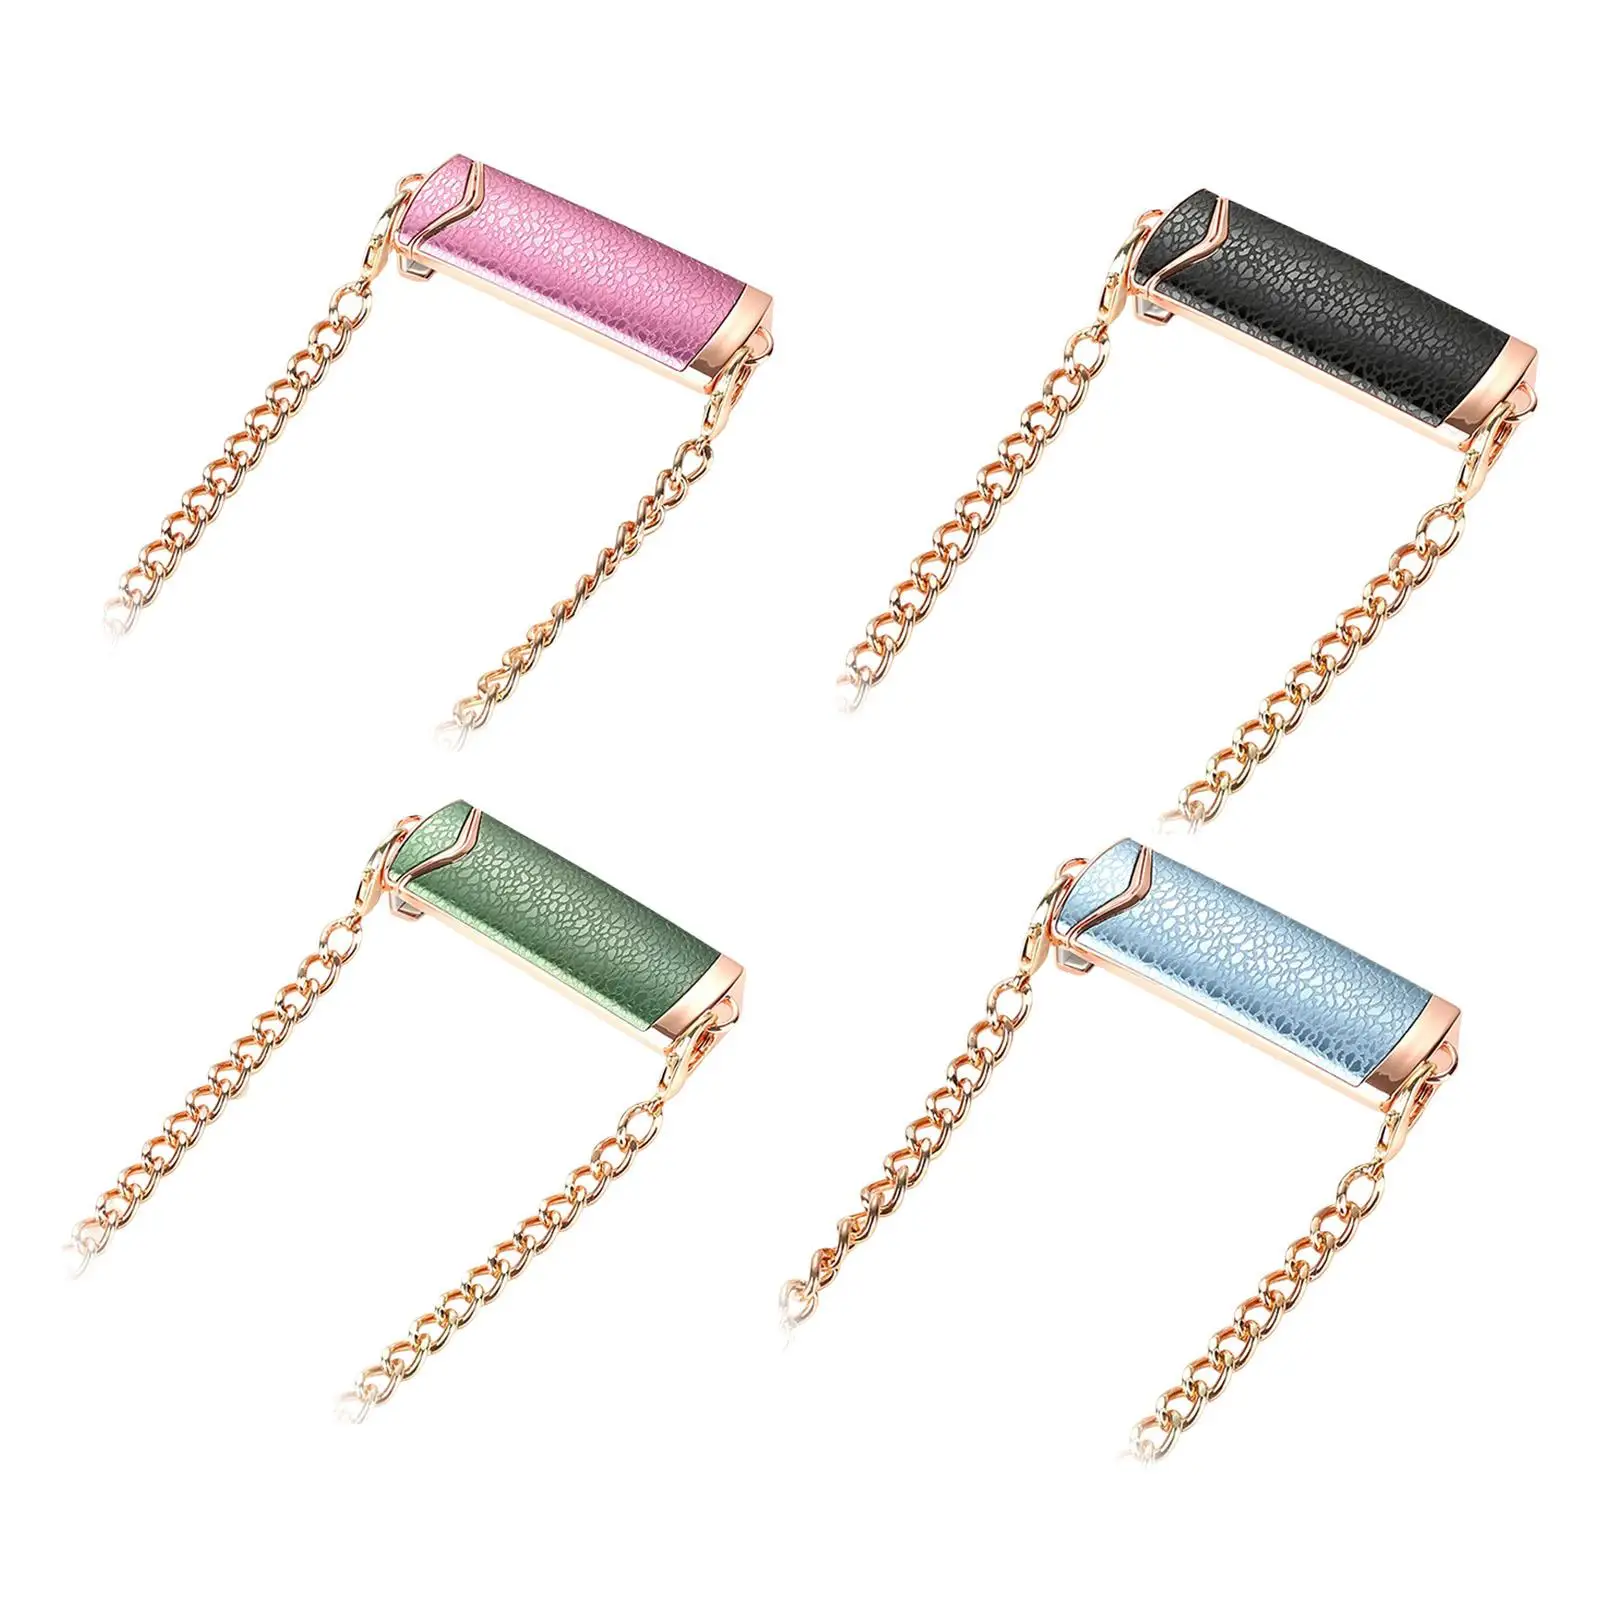 Universal Mobile Phone Chain Back Clip Detachable Chain Phone Holder Lanyard for Travelling